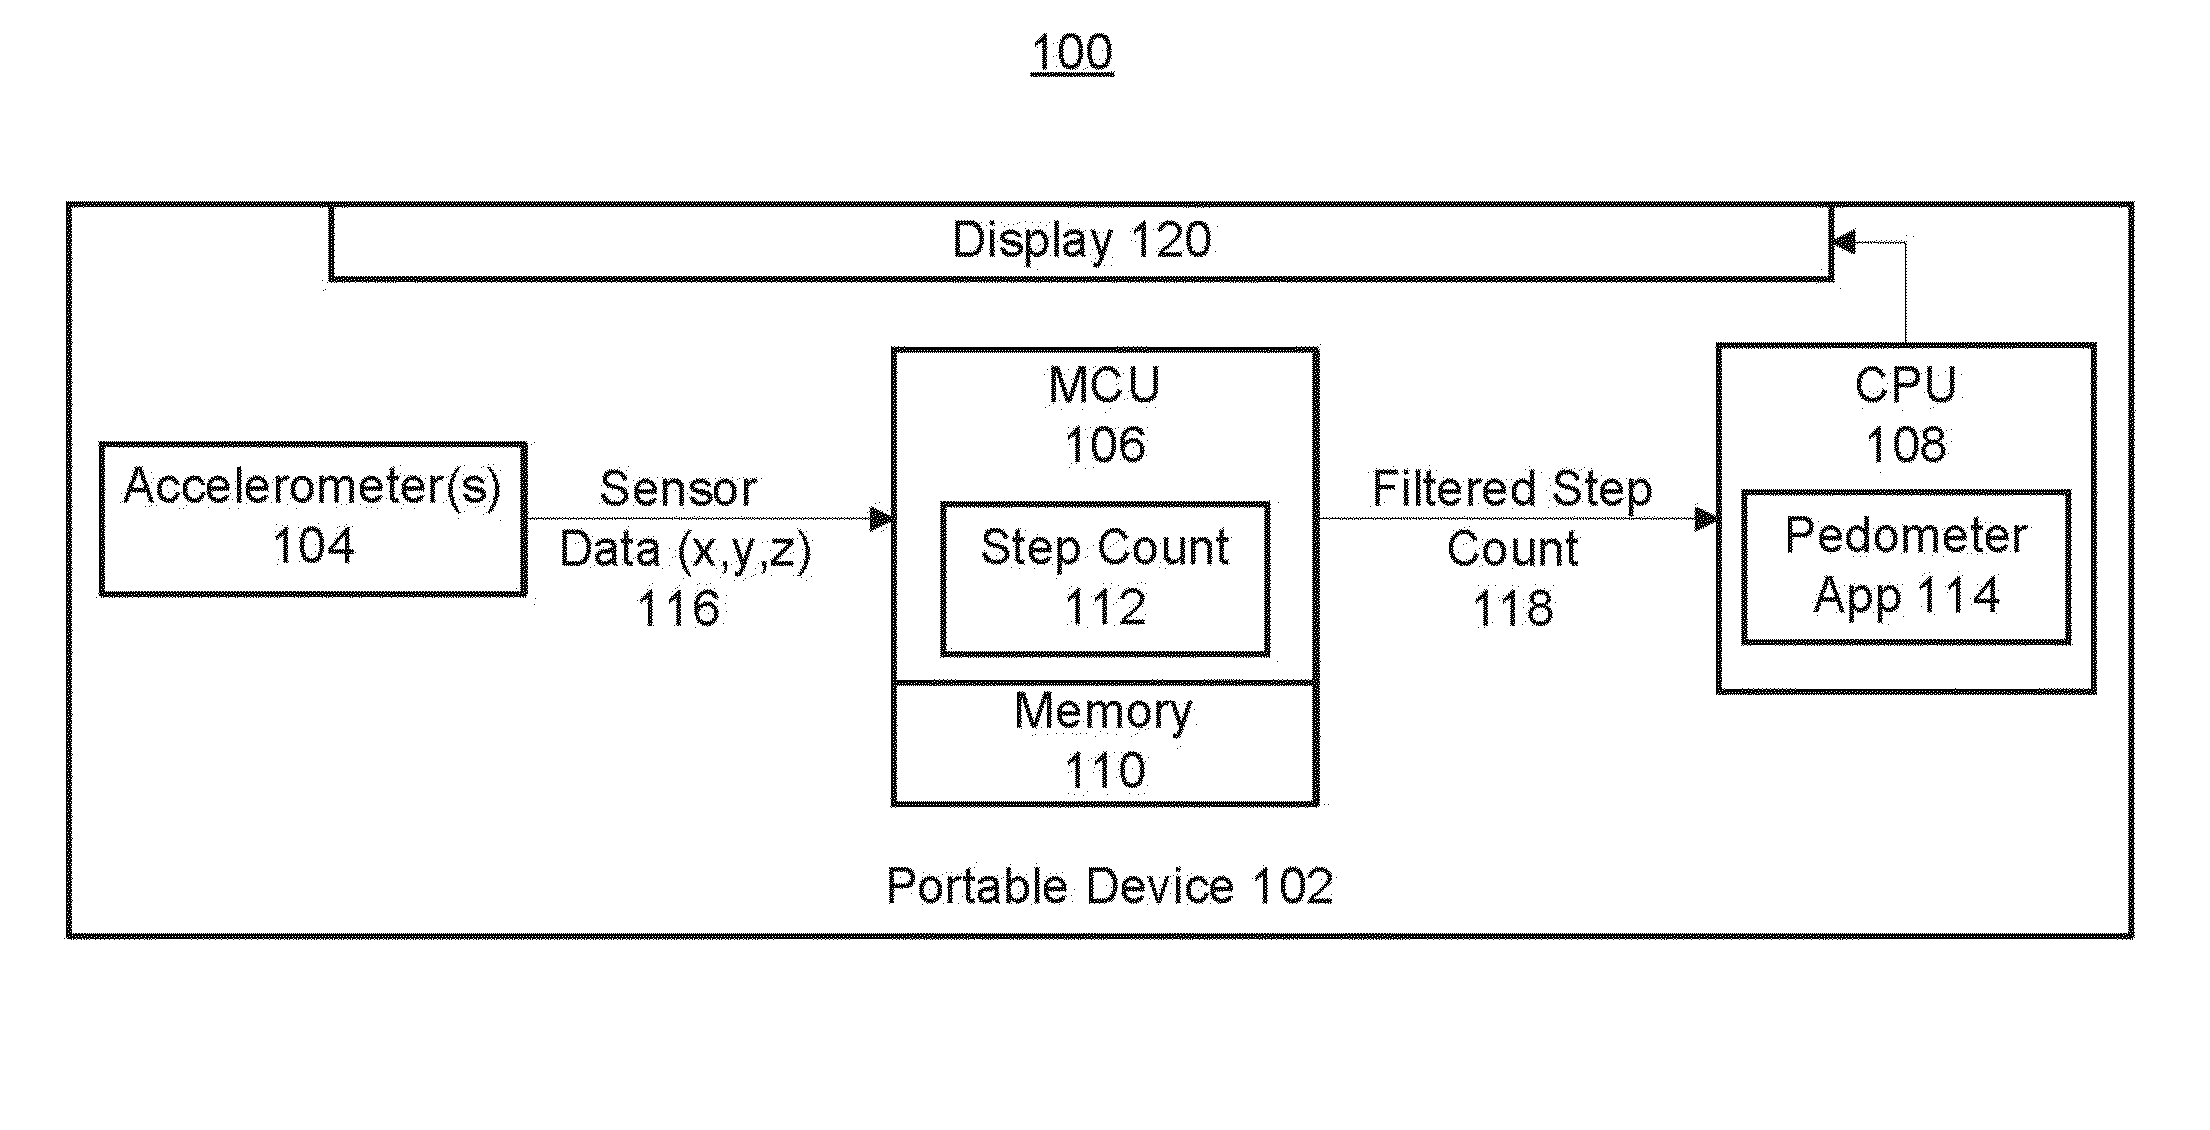 Pedometer in a low-power device